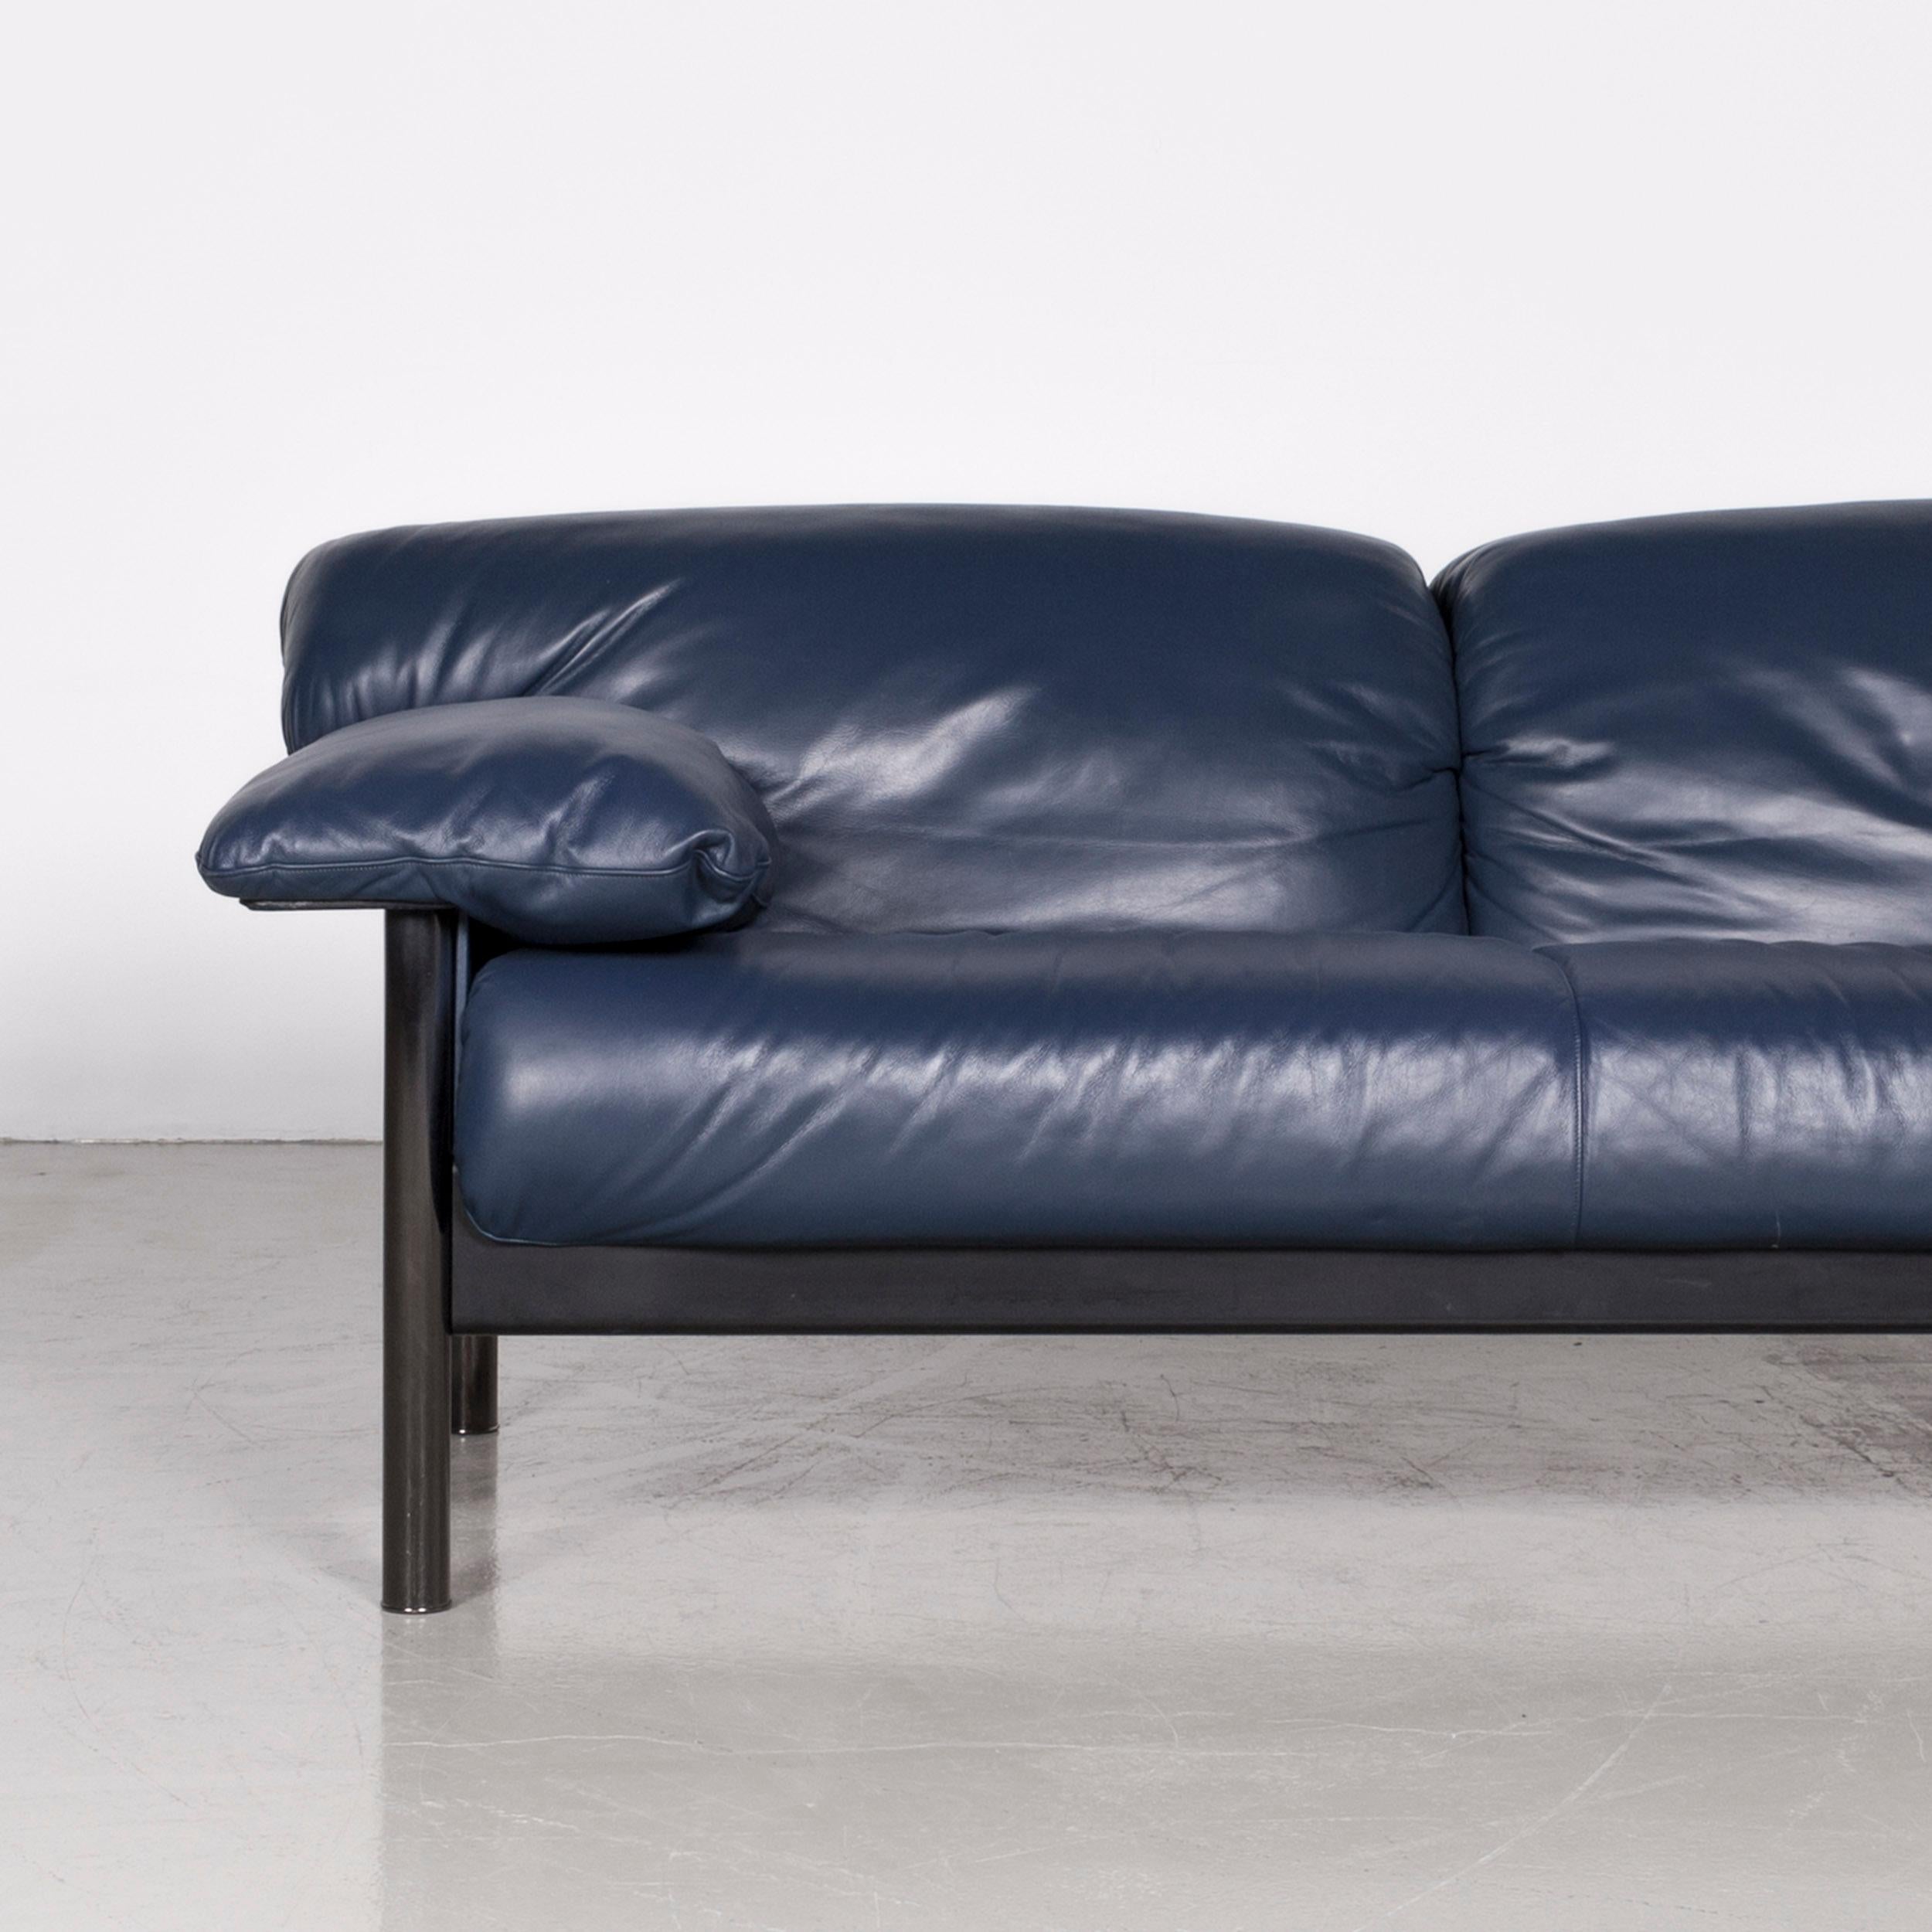 Poltrona Frau Designer Leather Two-Seat Couch Blue In Good Condition For Sale In Cologne, DE